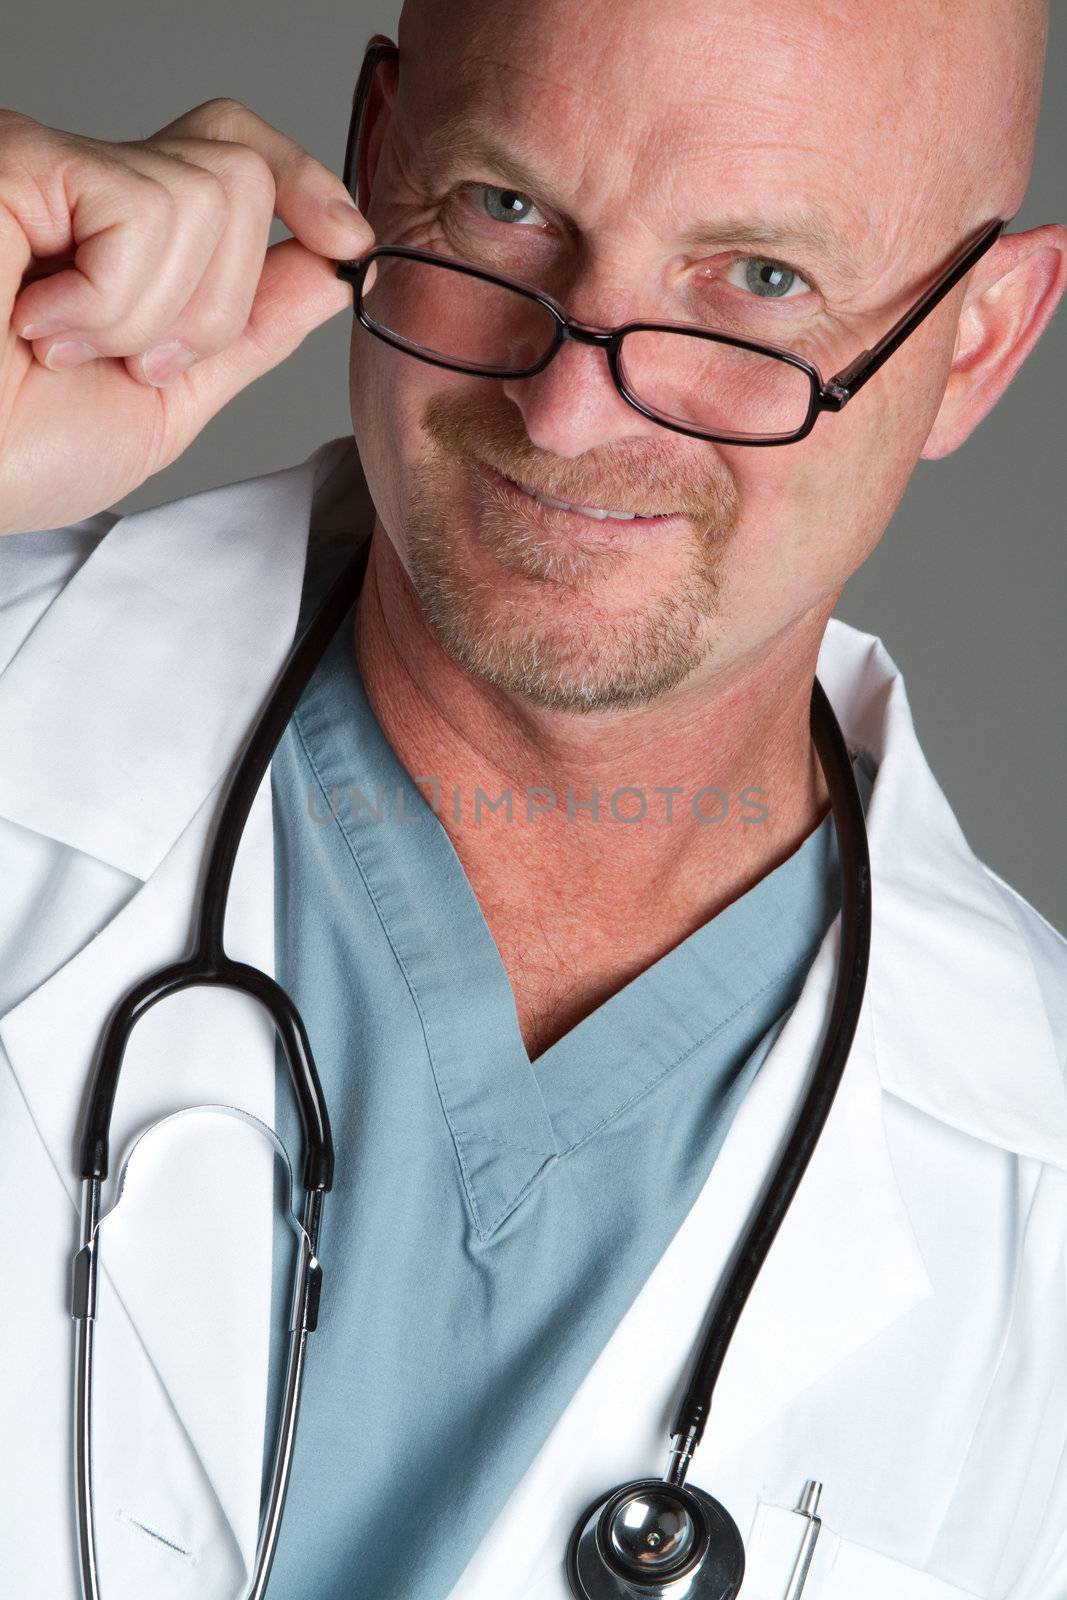 Smiling doctor wearing glasses